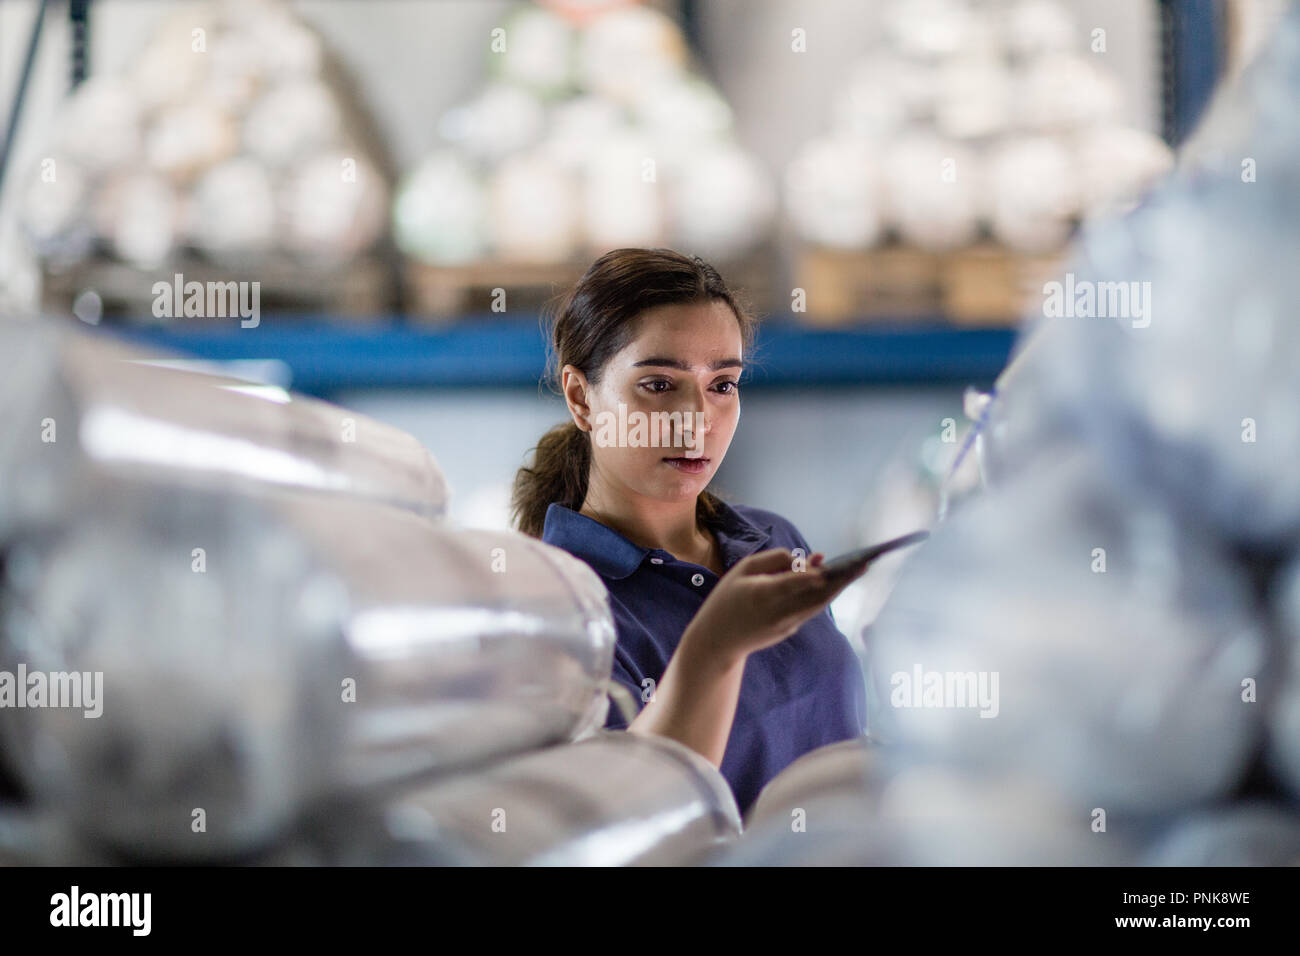 Female scanning item in distribution warehouse Stock Photo